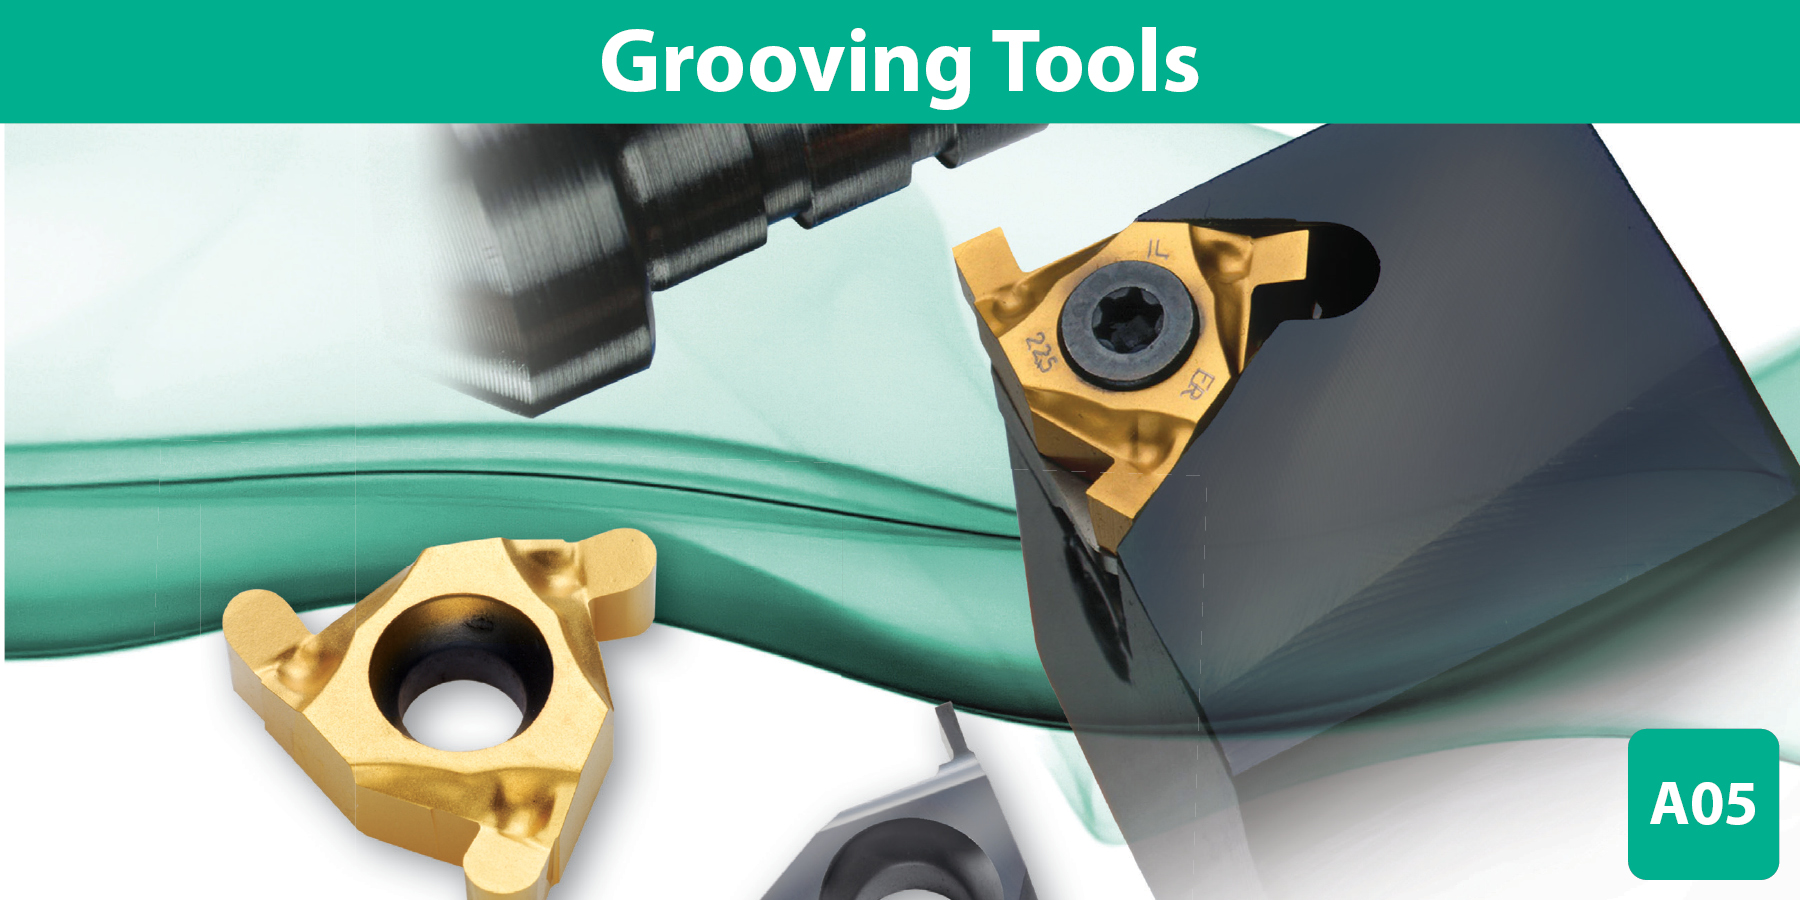 A05_Grooving_Tools